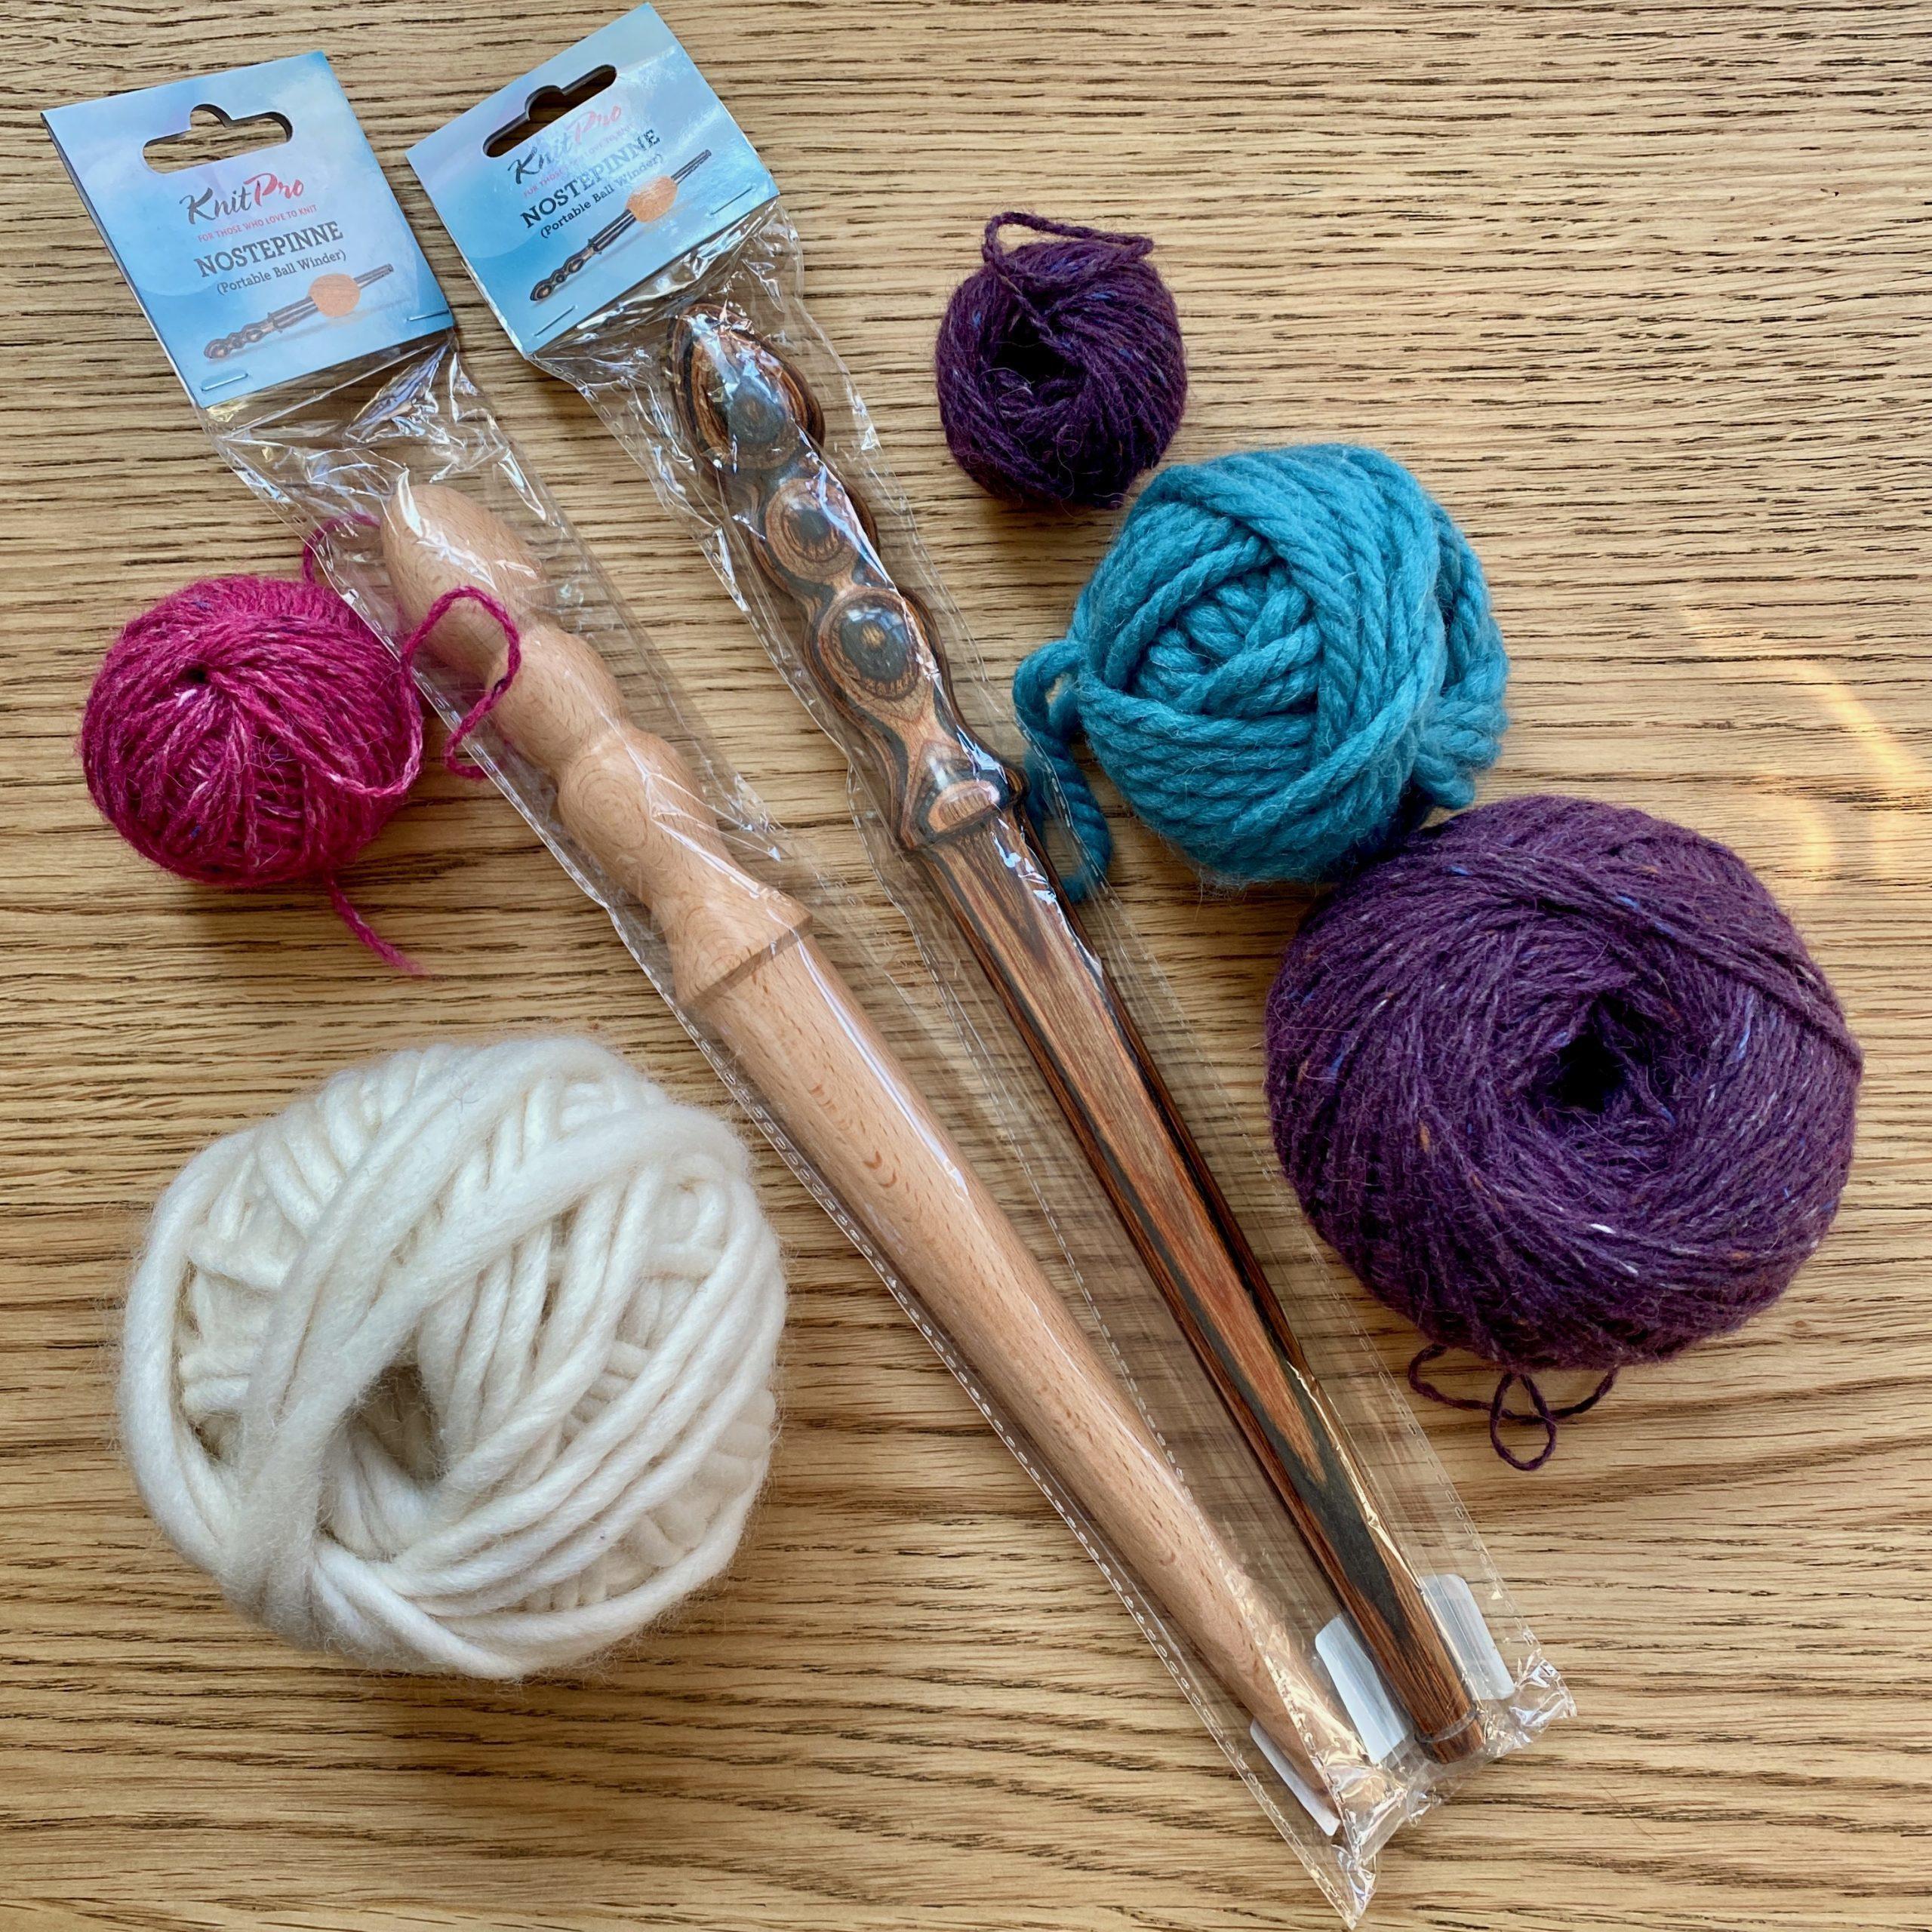 How To Wind Leftover Yarn With A Portable Ball Winder - Knit With Hannah